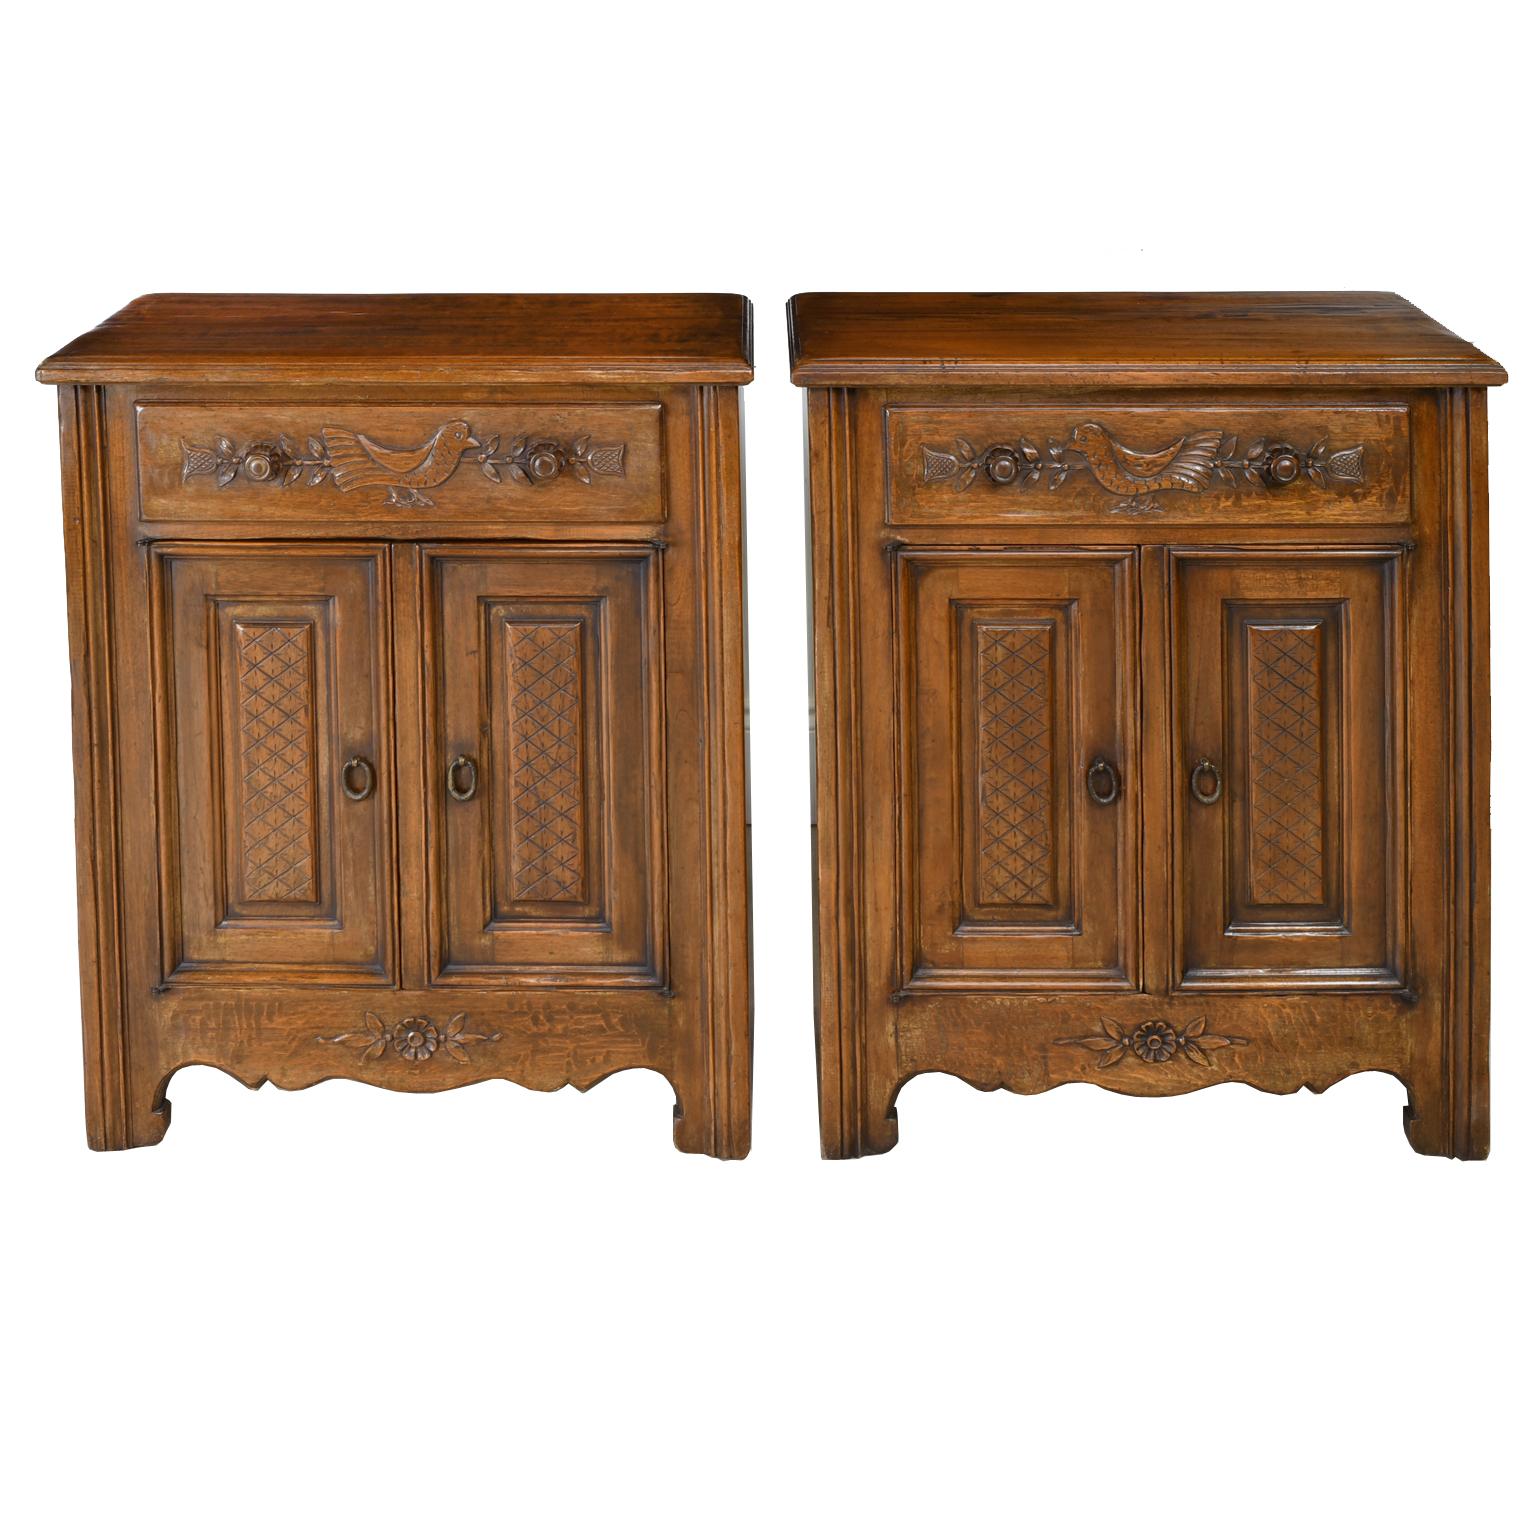 A charming pair of French Provincial style cupboards in walnut with one drawer above two cabinet doors. Carved embellishments include a bird amidst a swag of flowers and foliage on the top drawer, carved lattice design on raised door panels, rosette